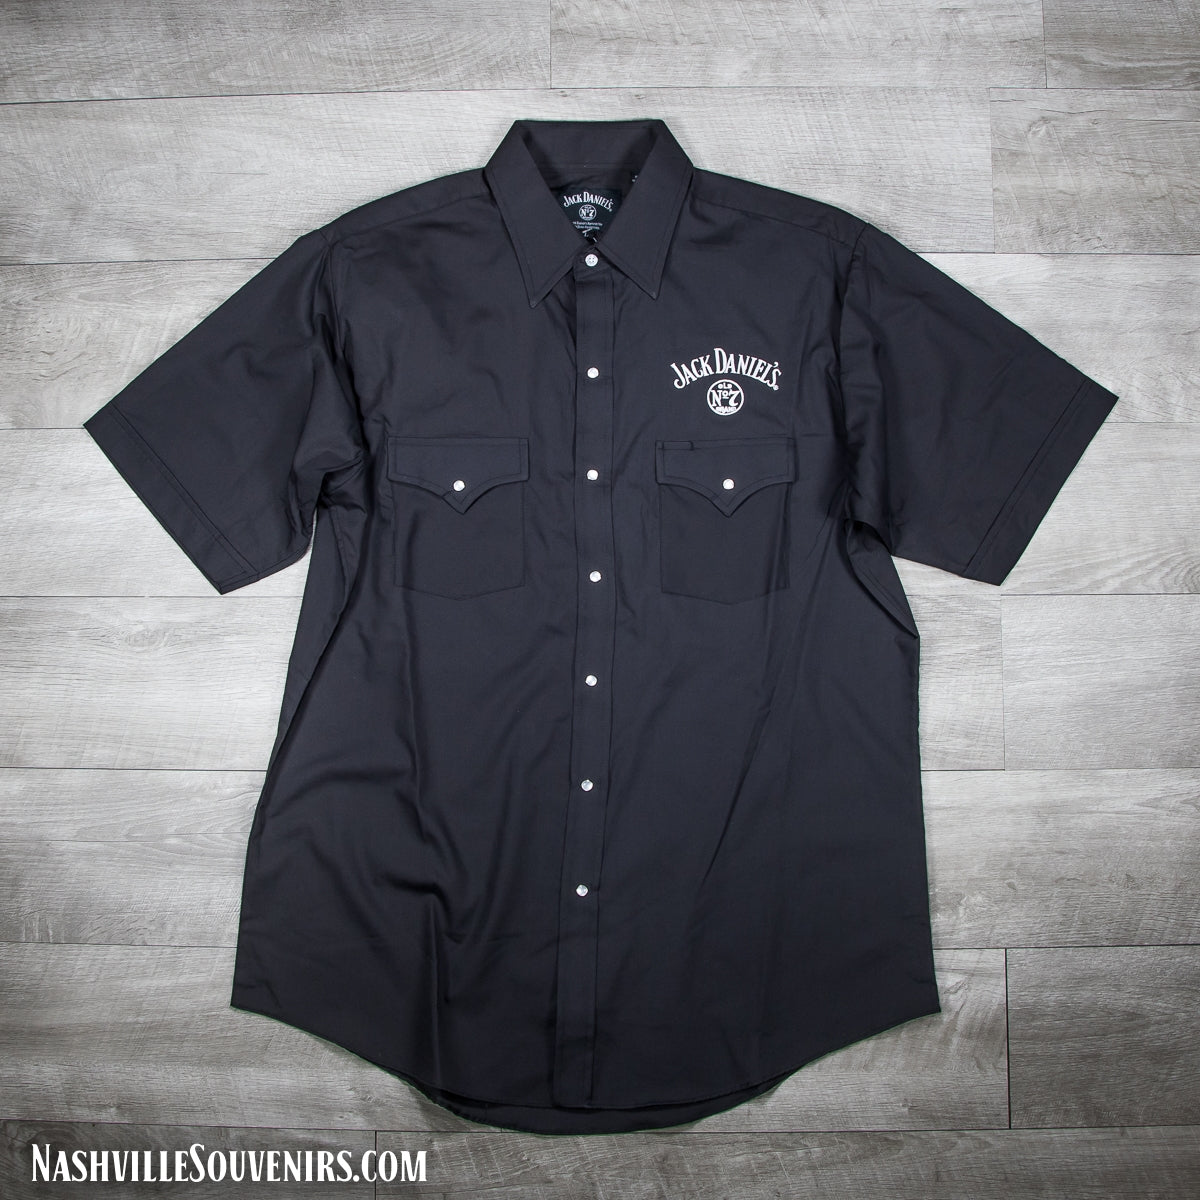 Officially licensed Jack Daniels Black Western Short Sleeve Shirt in black. Get yours with FREE SHIPPING on all US orders over $75!